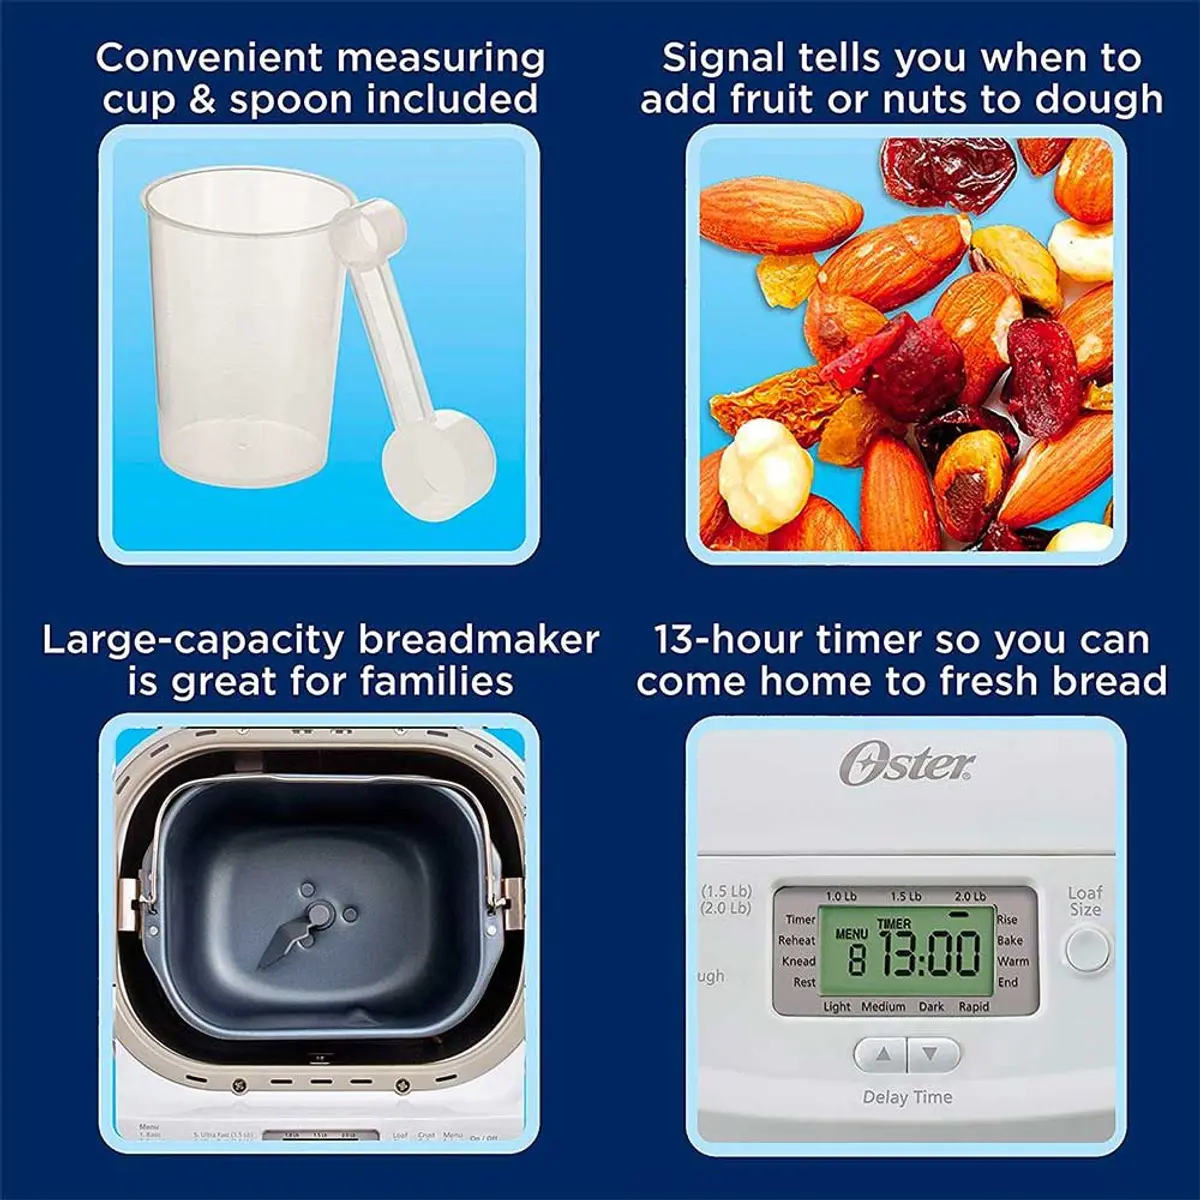 Typical features and control panel of a bread machine: Sunbeam Oster